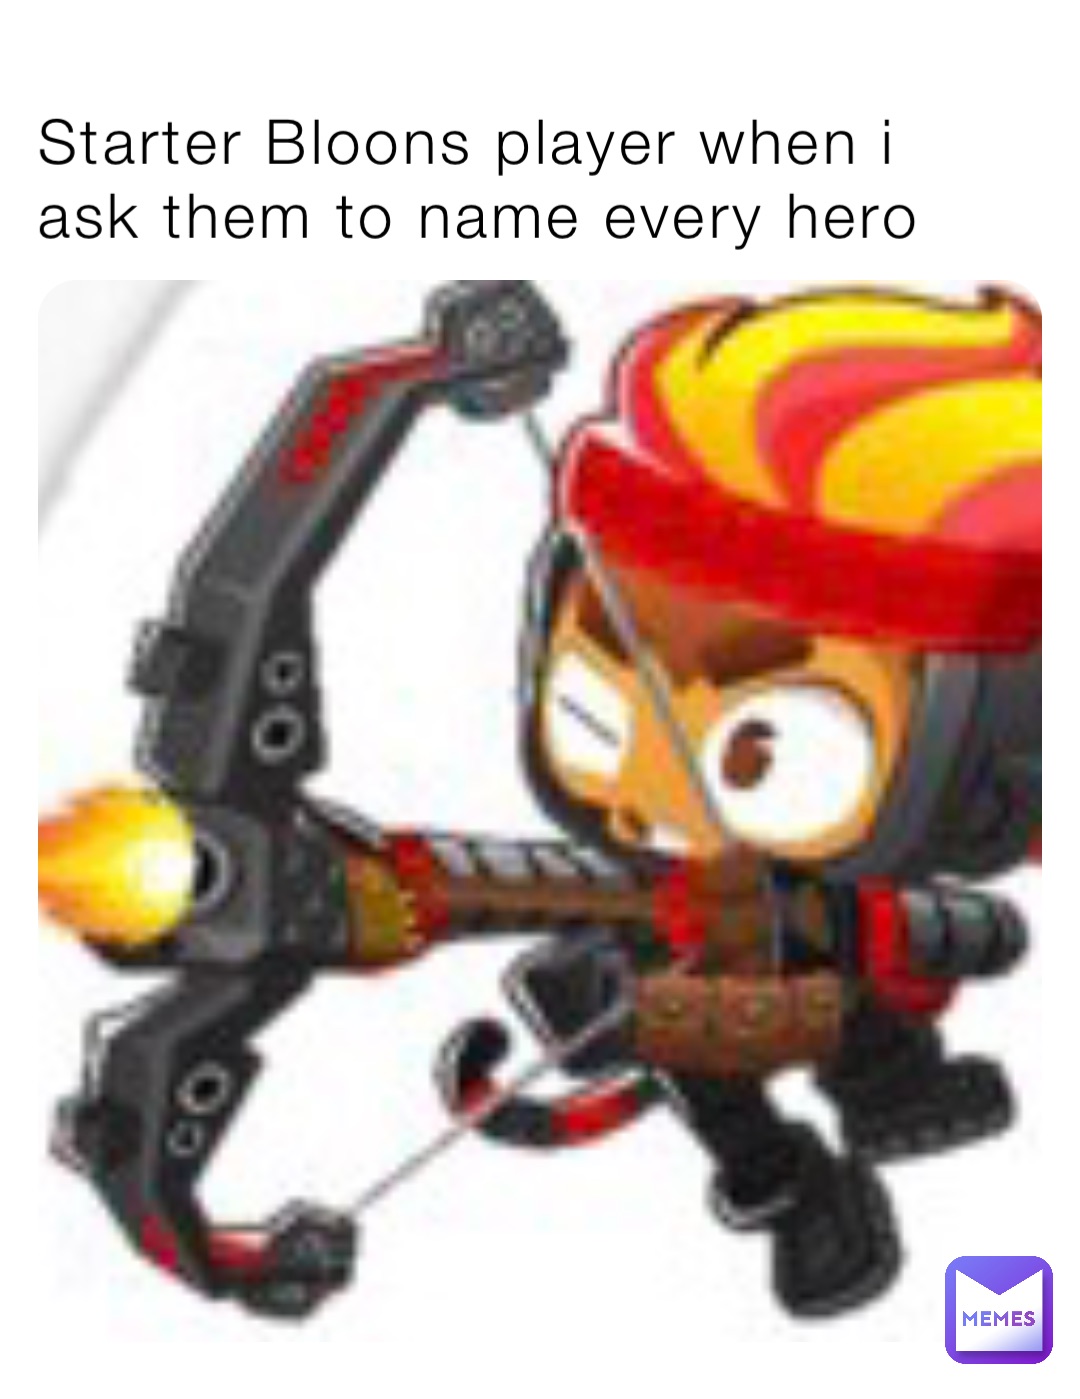 Starter Bloons player when i ask them to name every hero